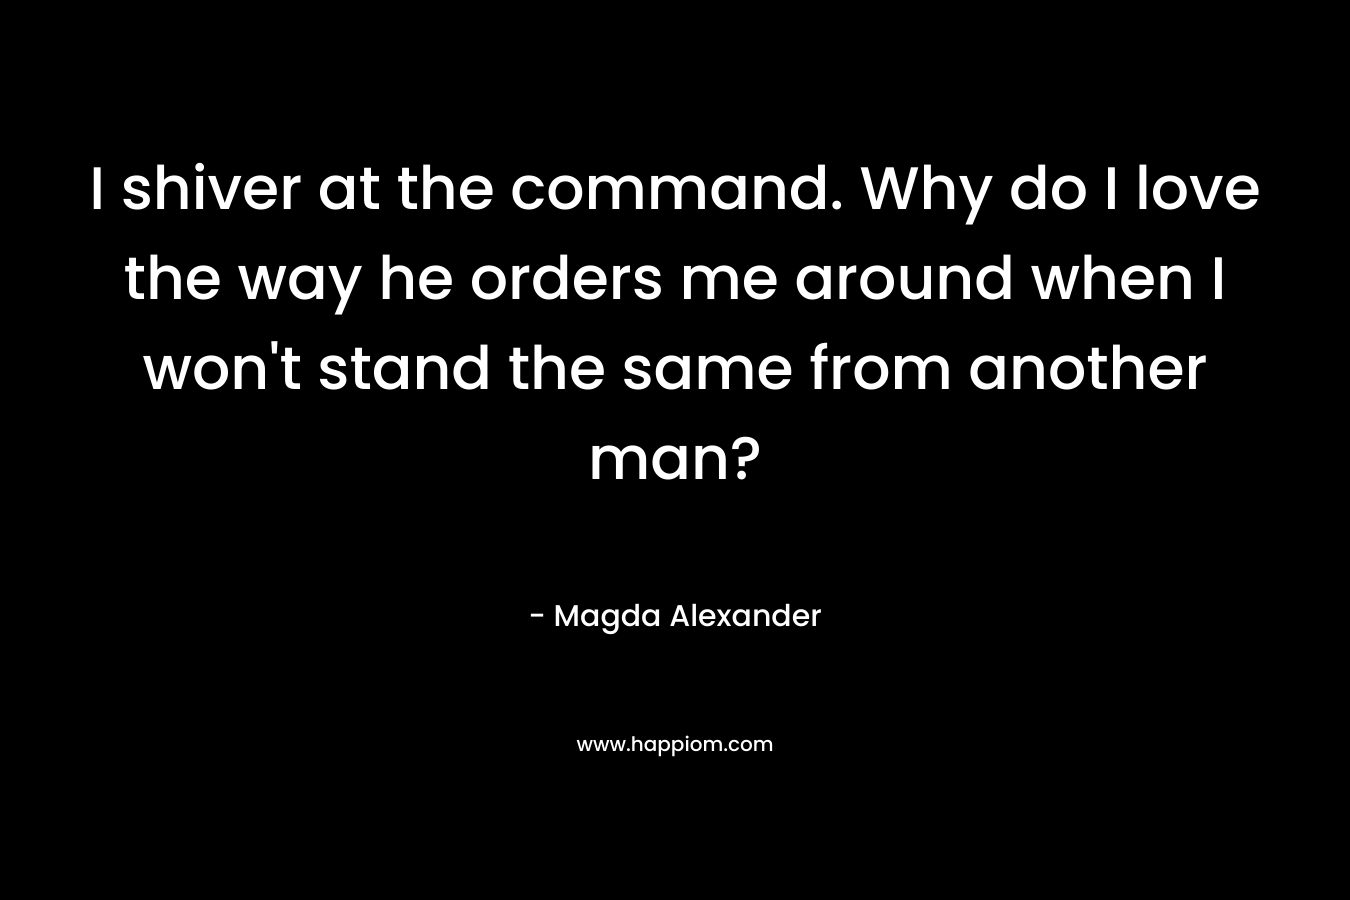 I shiver at the command. Why do I love the way he orders me around when I won’t stand the same from another man? – Magda Alexander